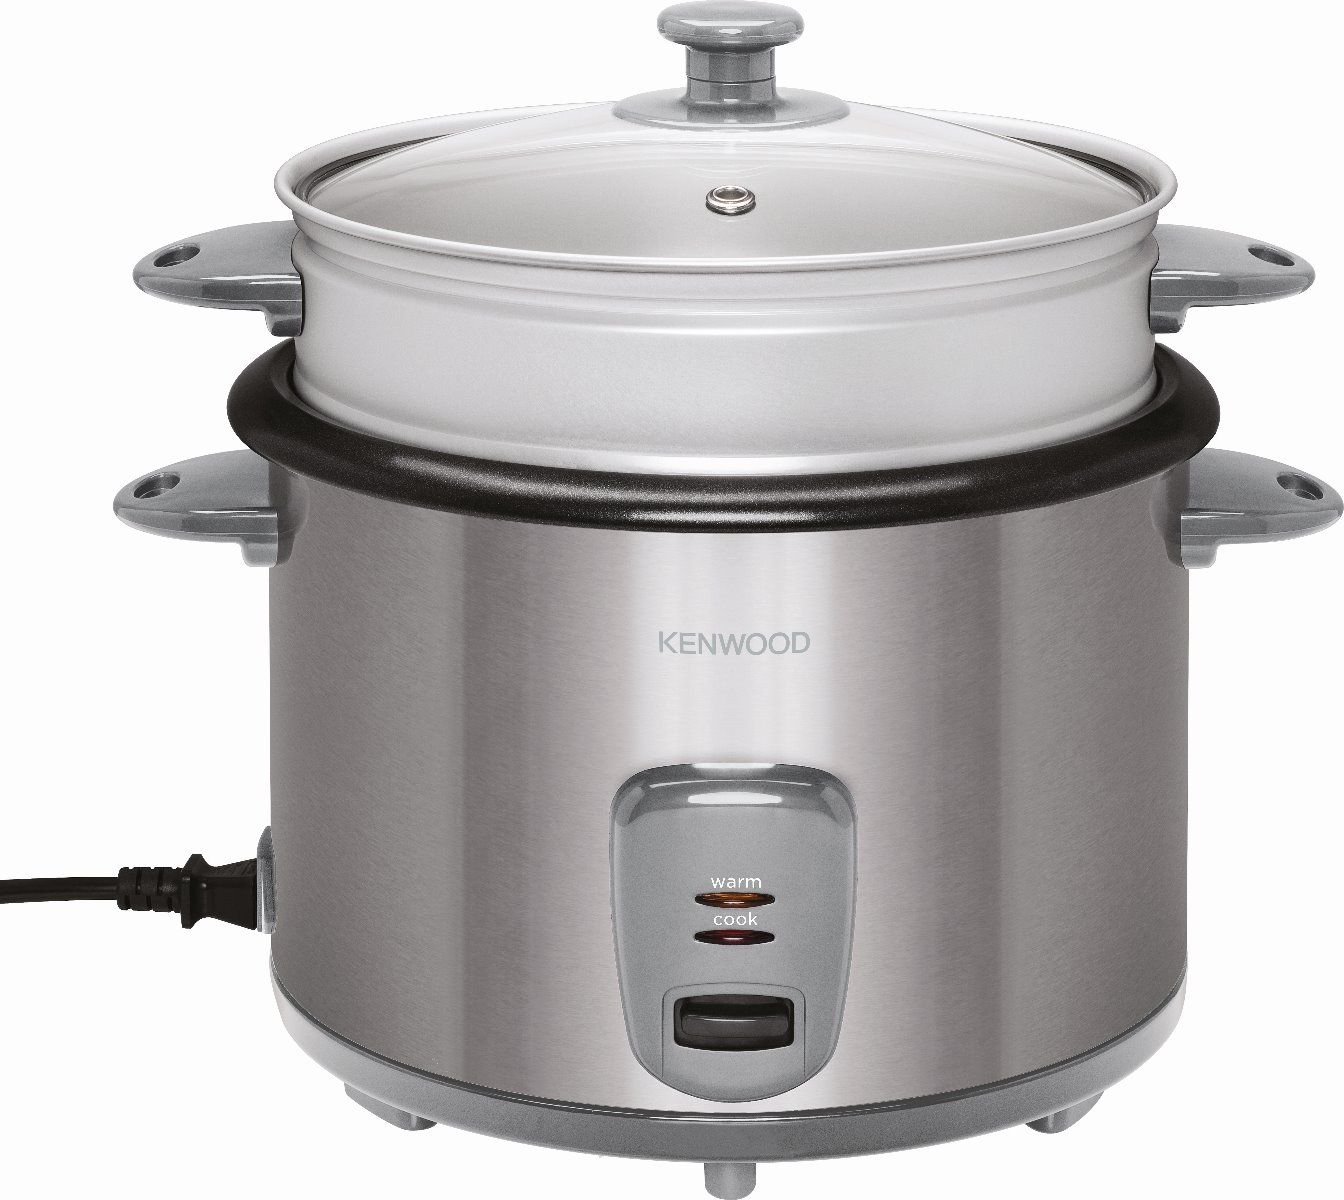 Kenwood Rice Cooker With Steam 1.8 Liter 700 W – RCM43